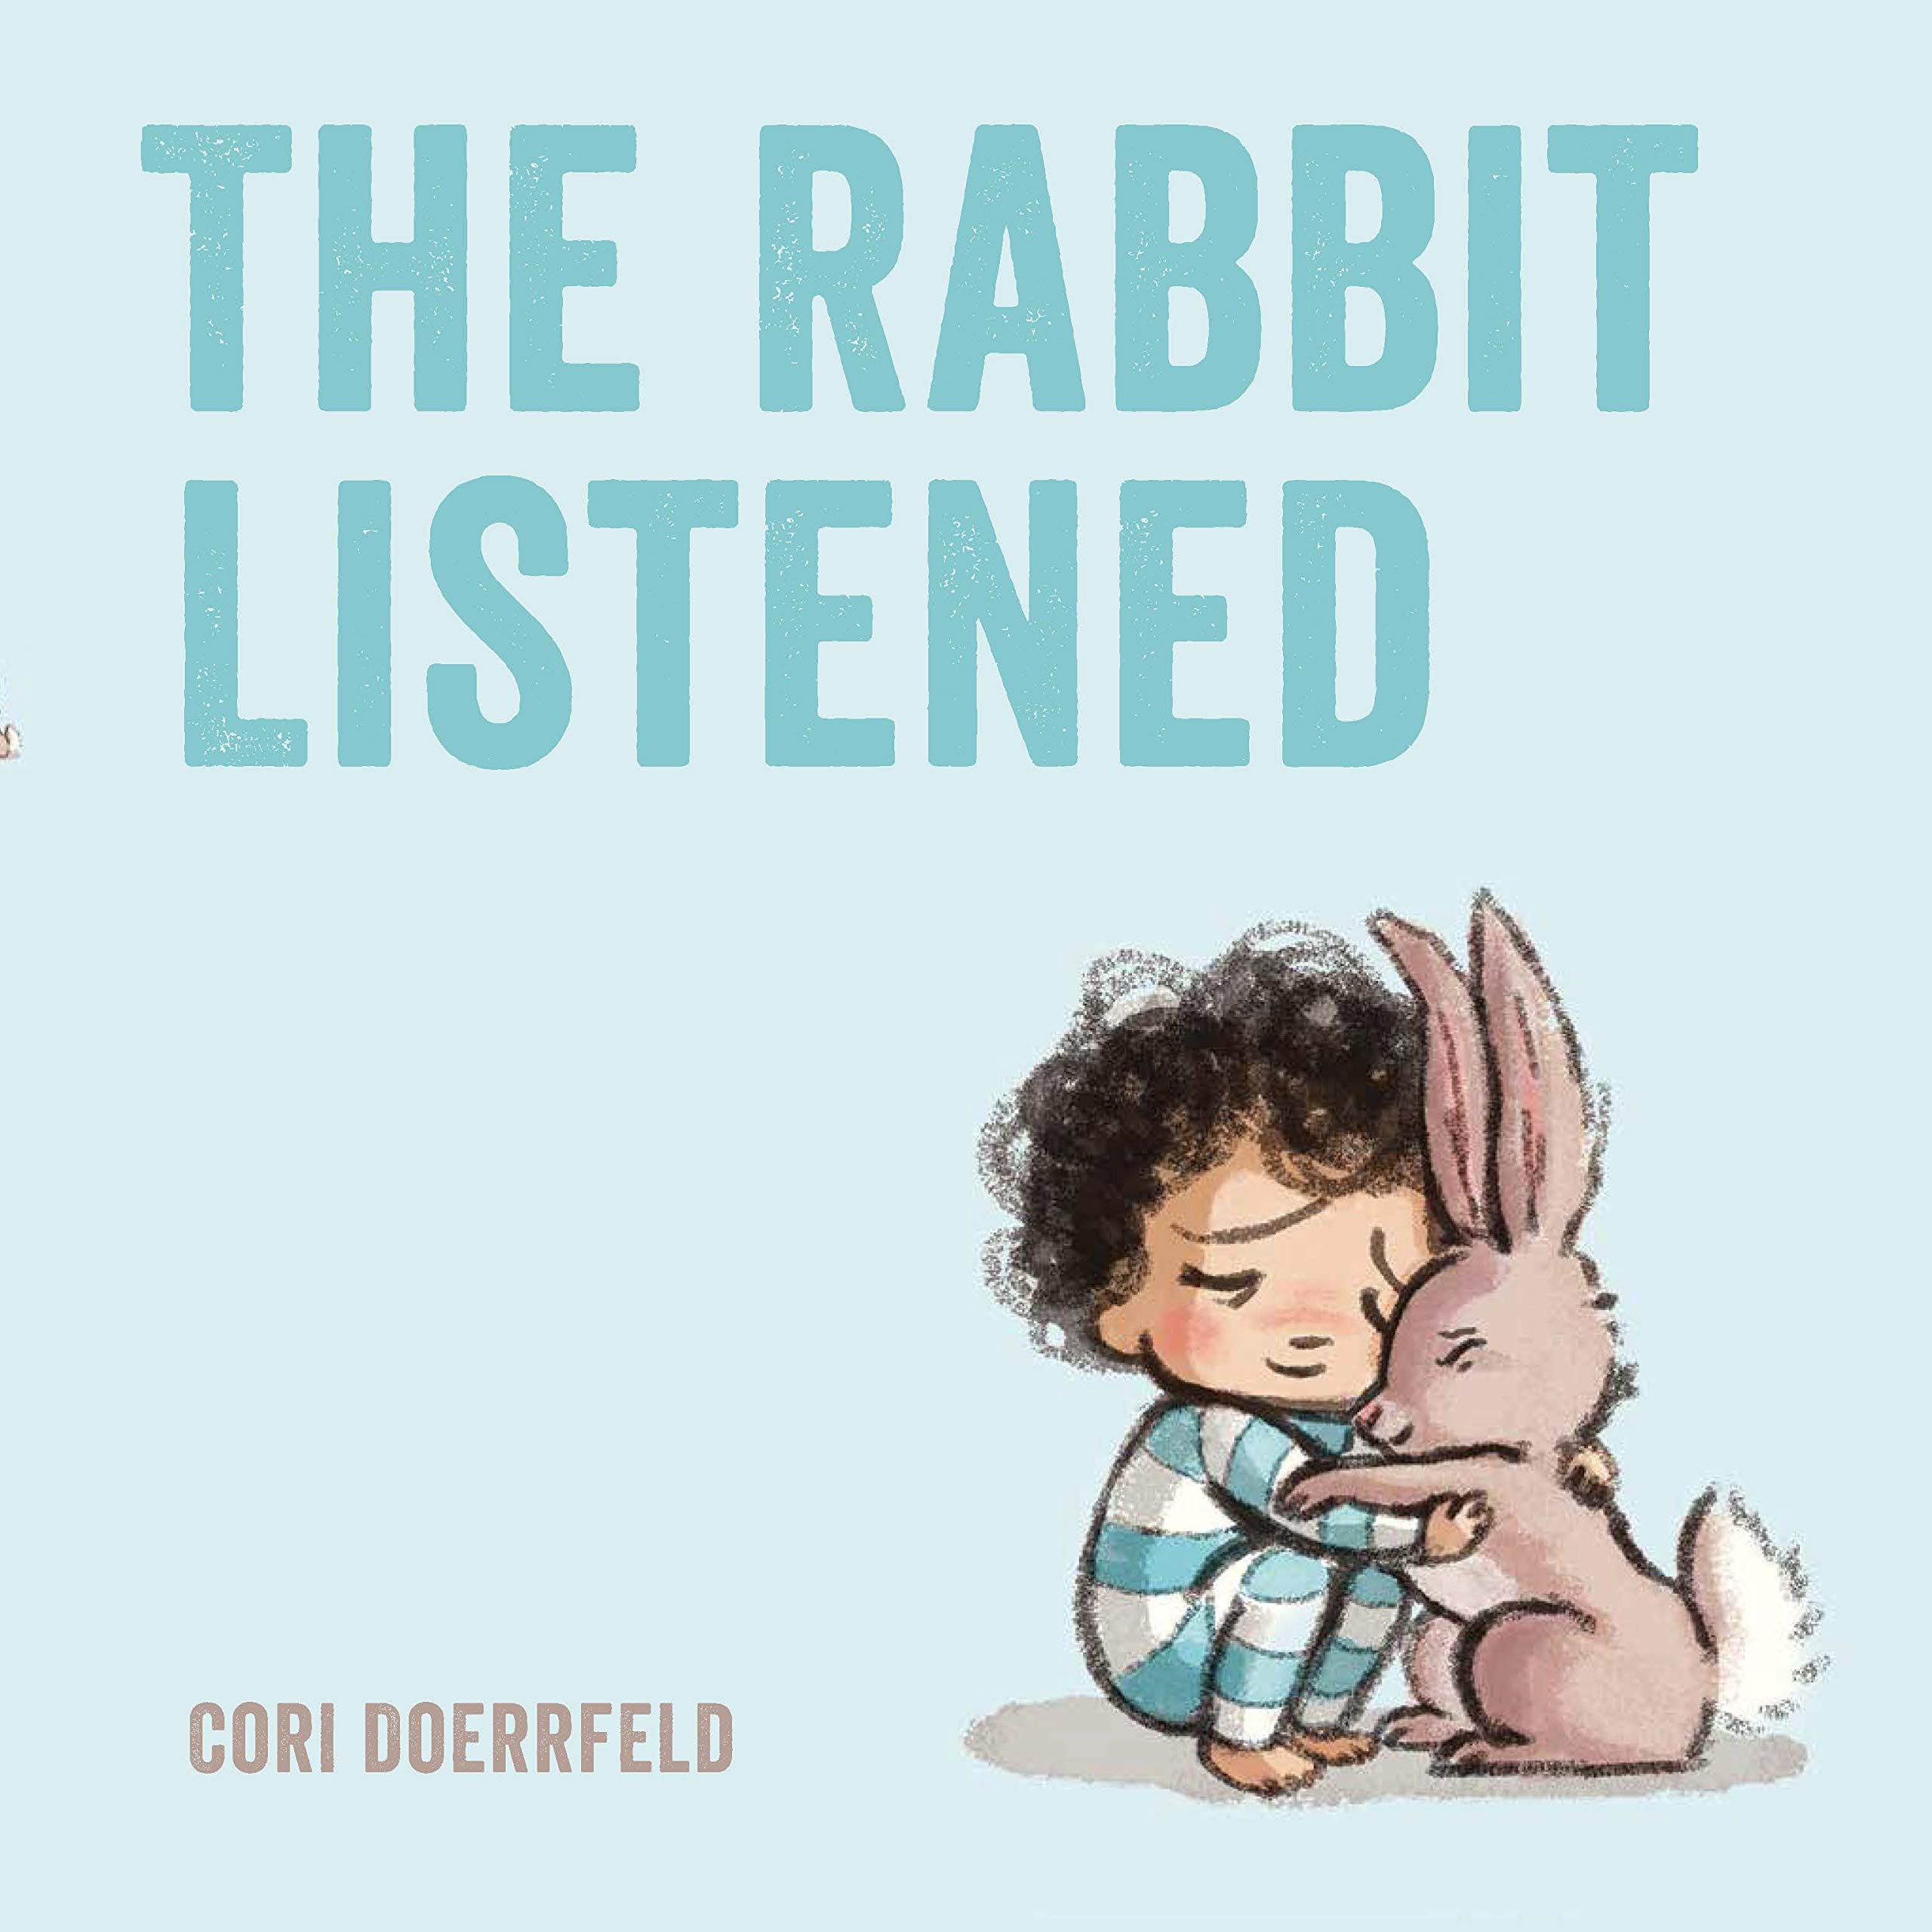 The Rabbit Listened, book cover